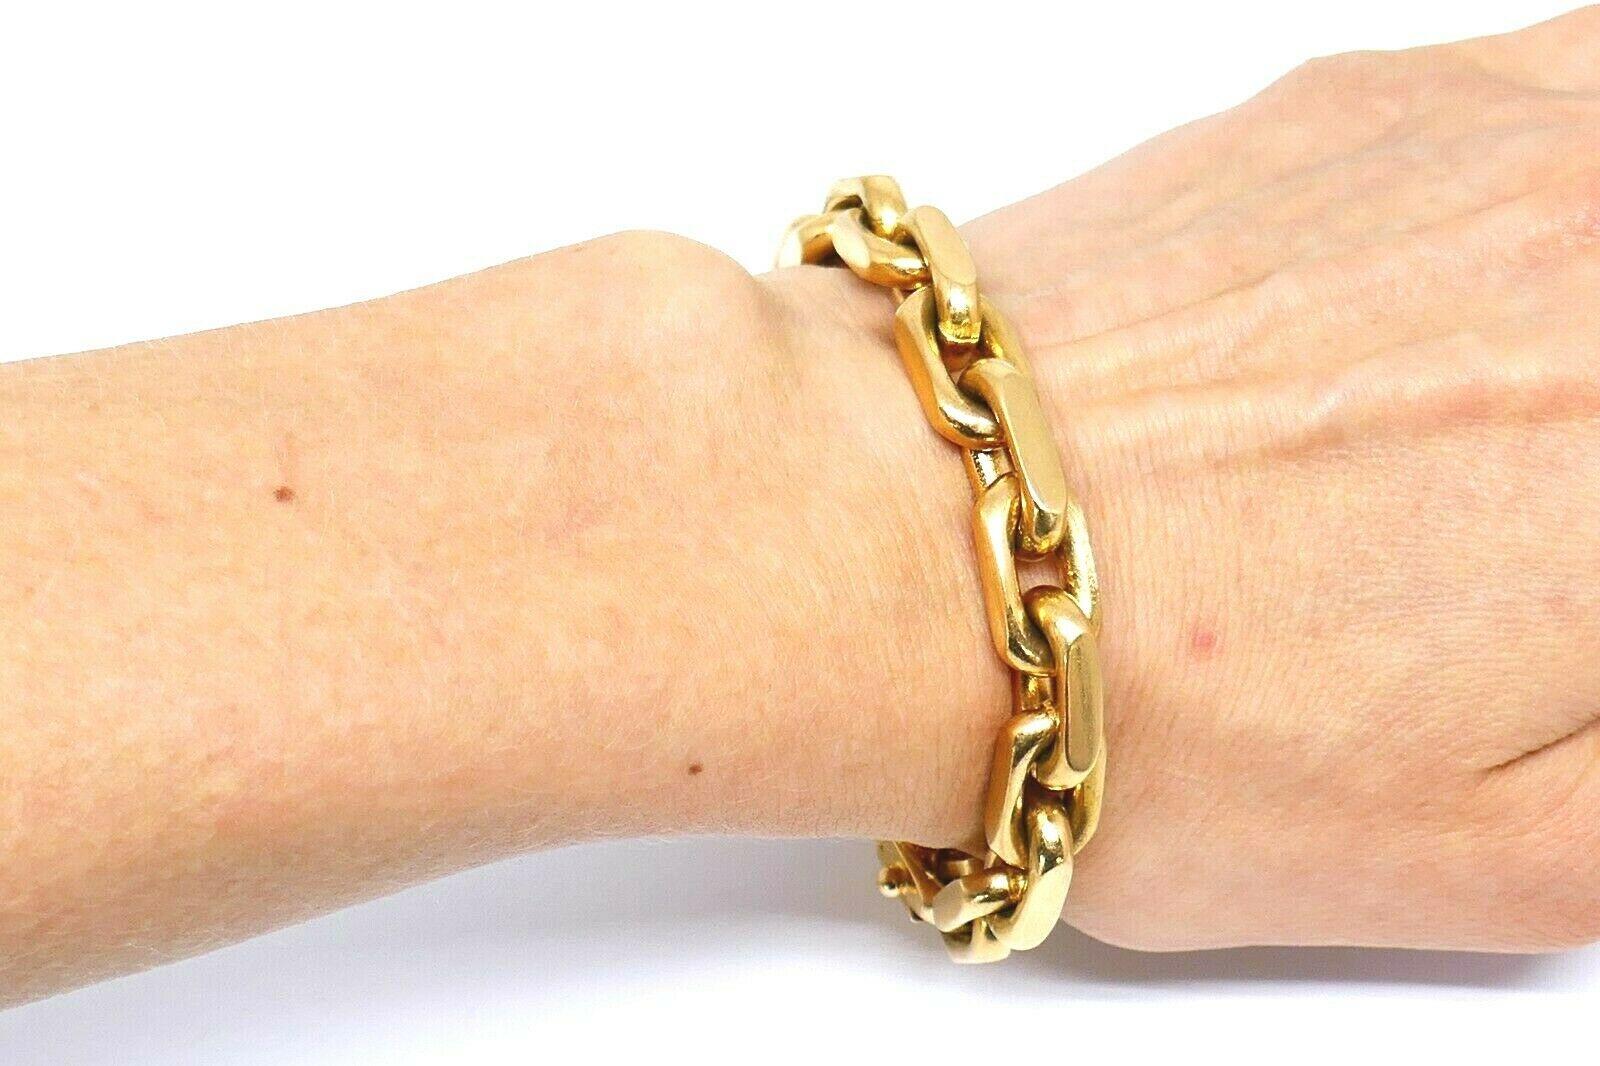 Heavy duty chunky chain bracelet by Bulgari made of 18k yellow gold with a nice matt finish, circa 1970s. Stamped with the Bulgari maker's mark and a hallmark for 18k gold.  
Measurements:  7.5